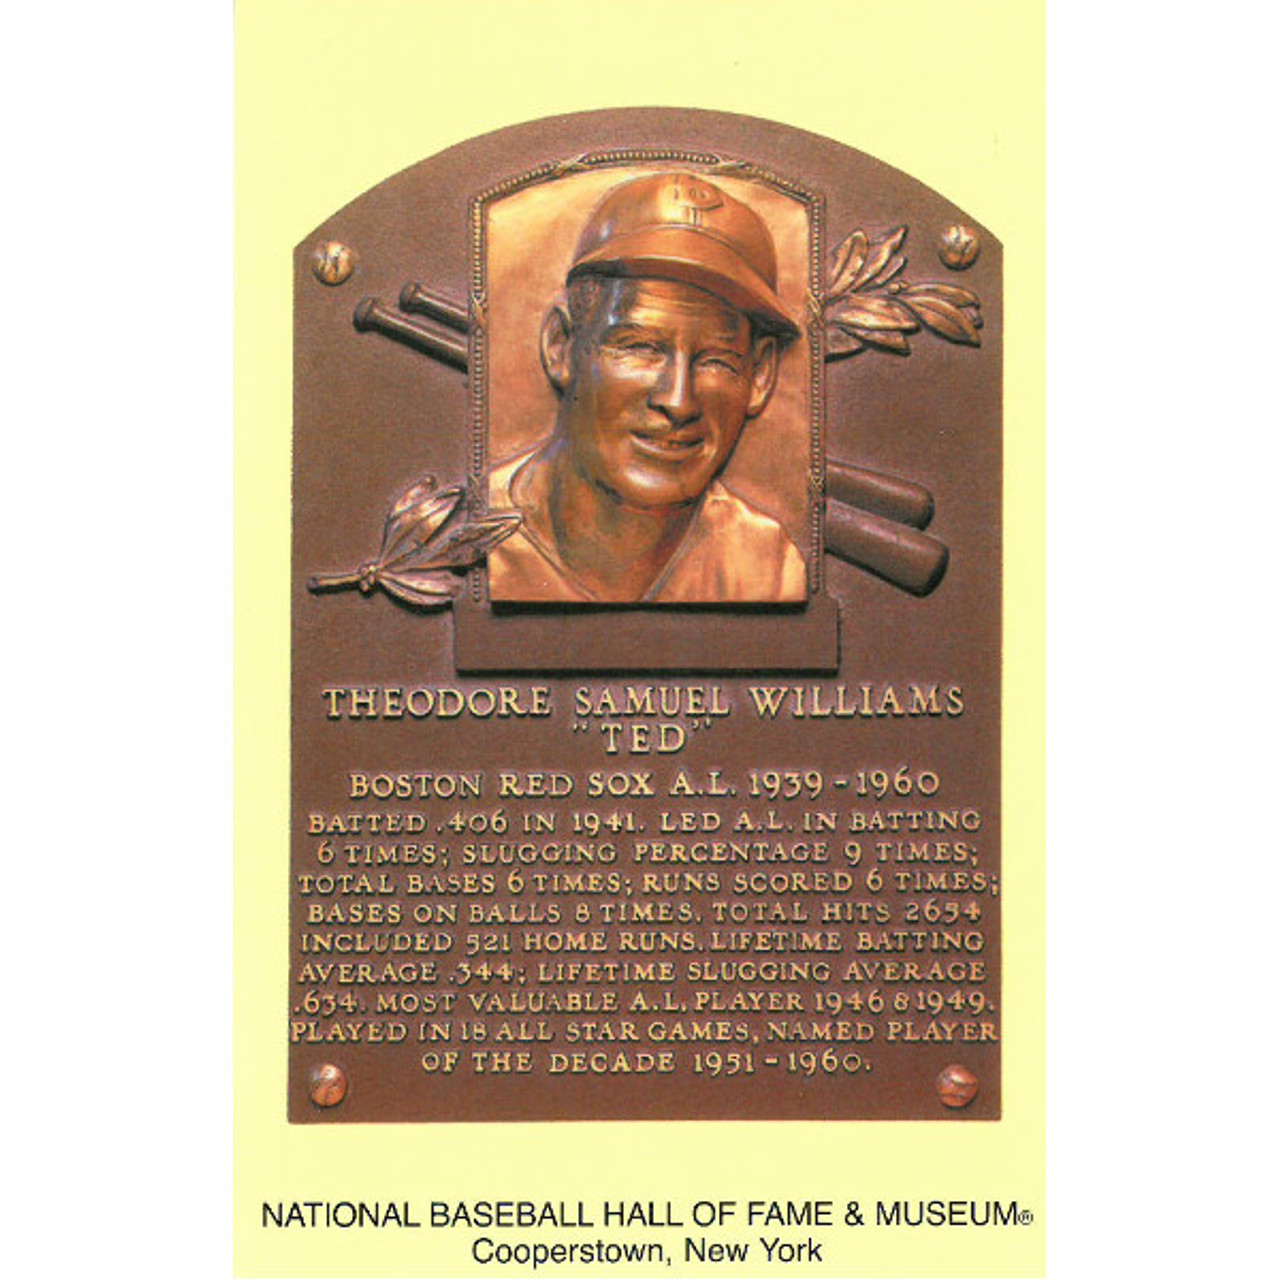 Bob Nightengale on X: Roberto Alomar resigns from Baseball Hall of Fame  board of directors, but his plaque remains  / X